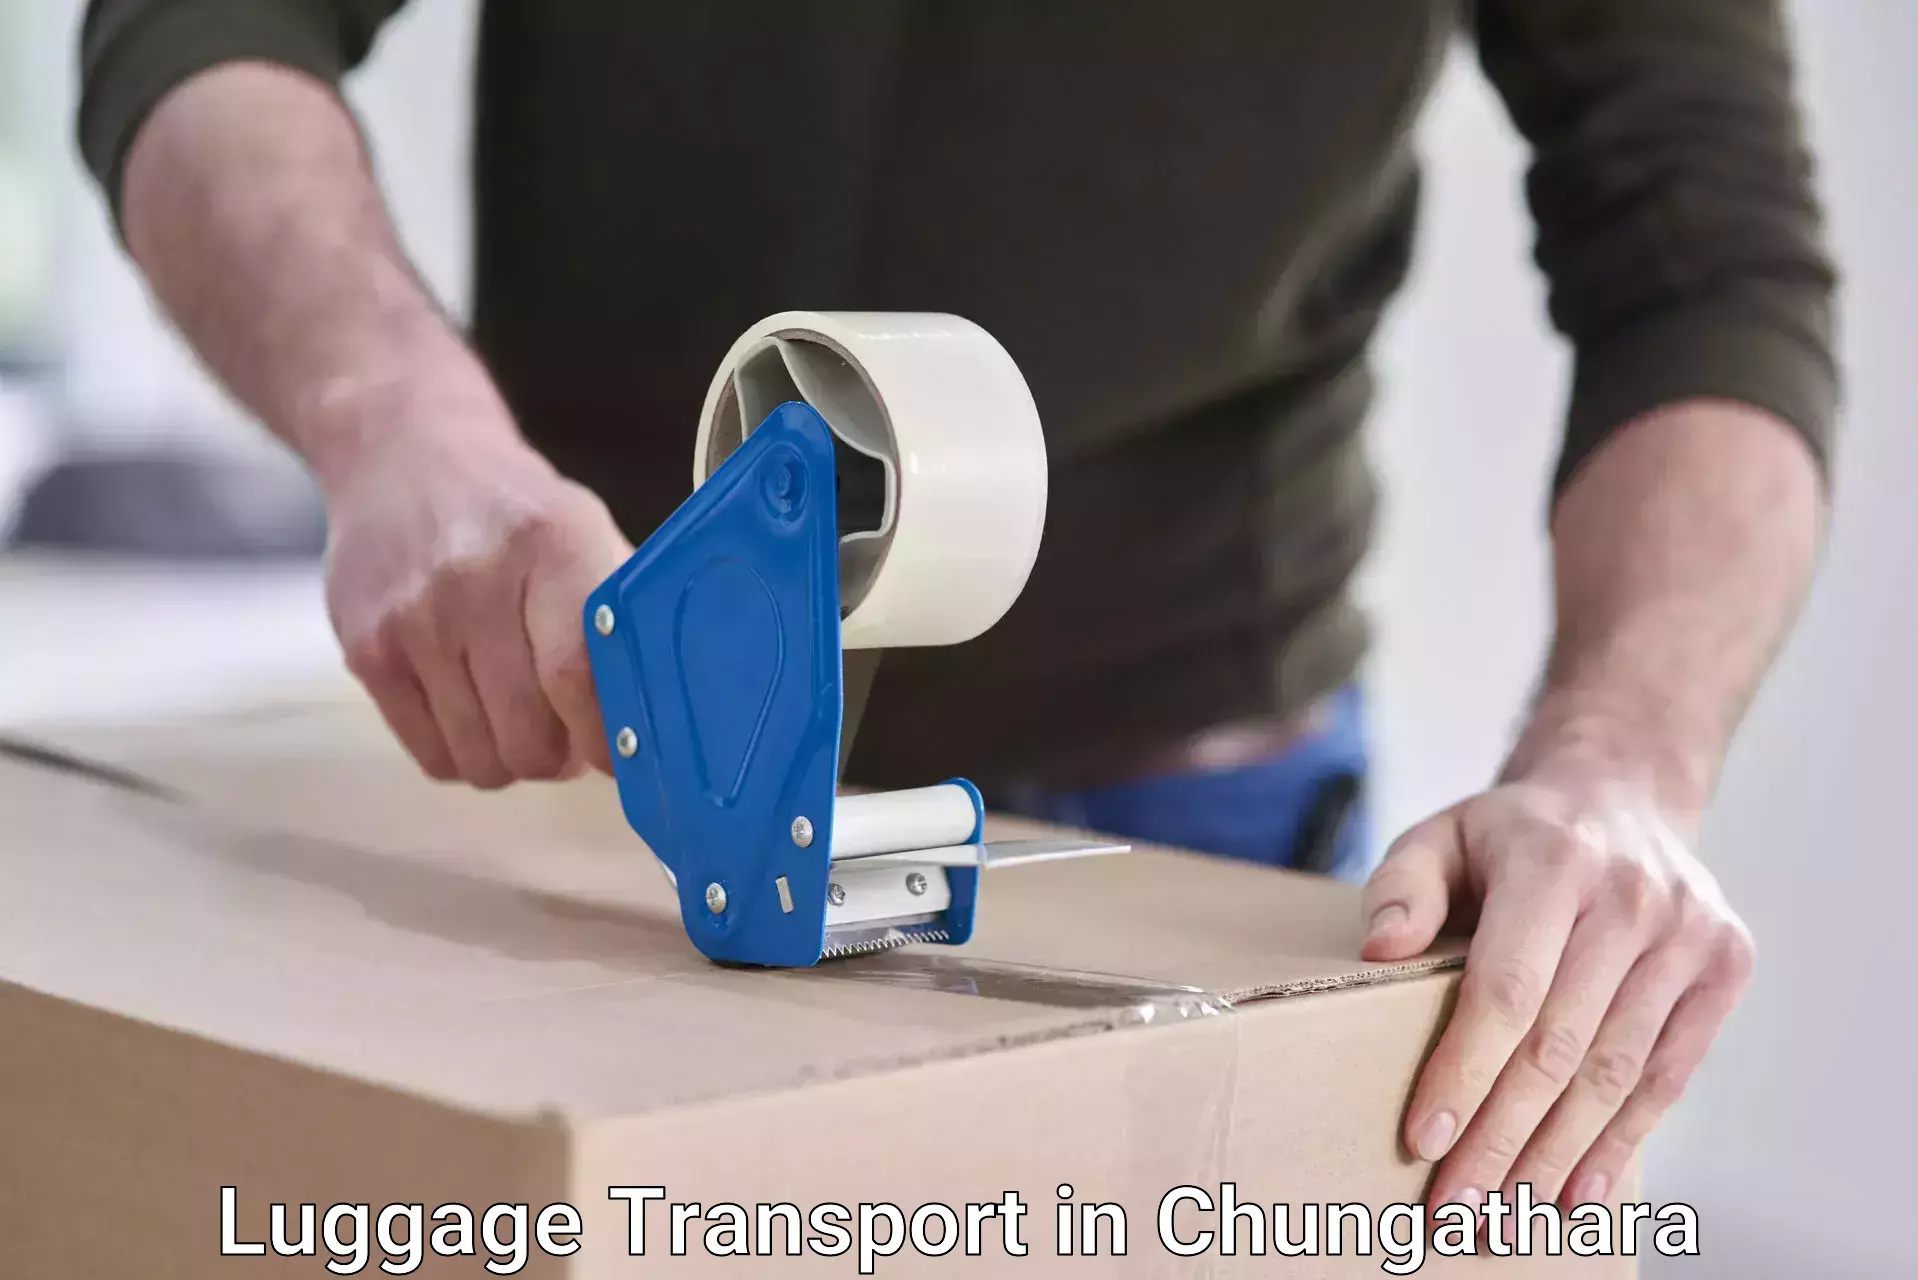 Luggage transport guidelines in Chungathara